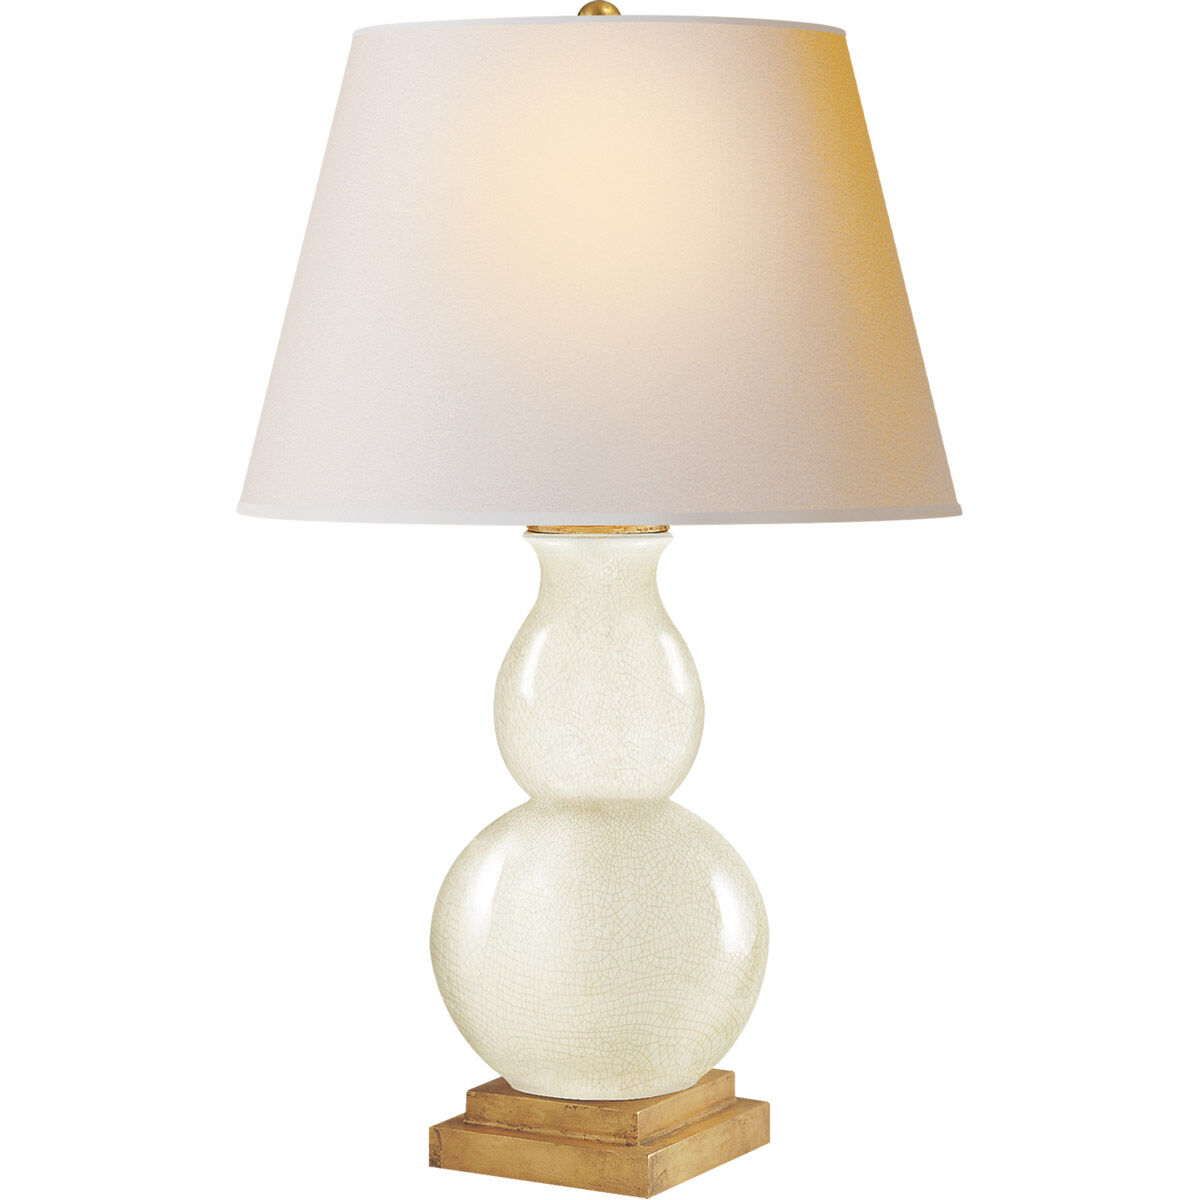 E. F. Chapman Gourd Form Table Lamp